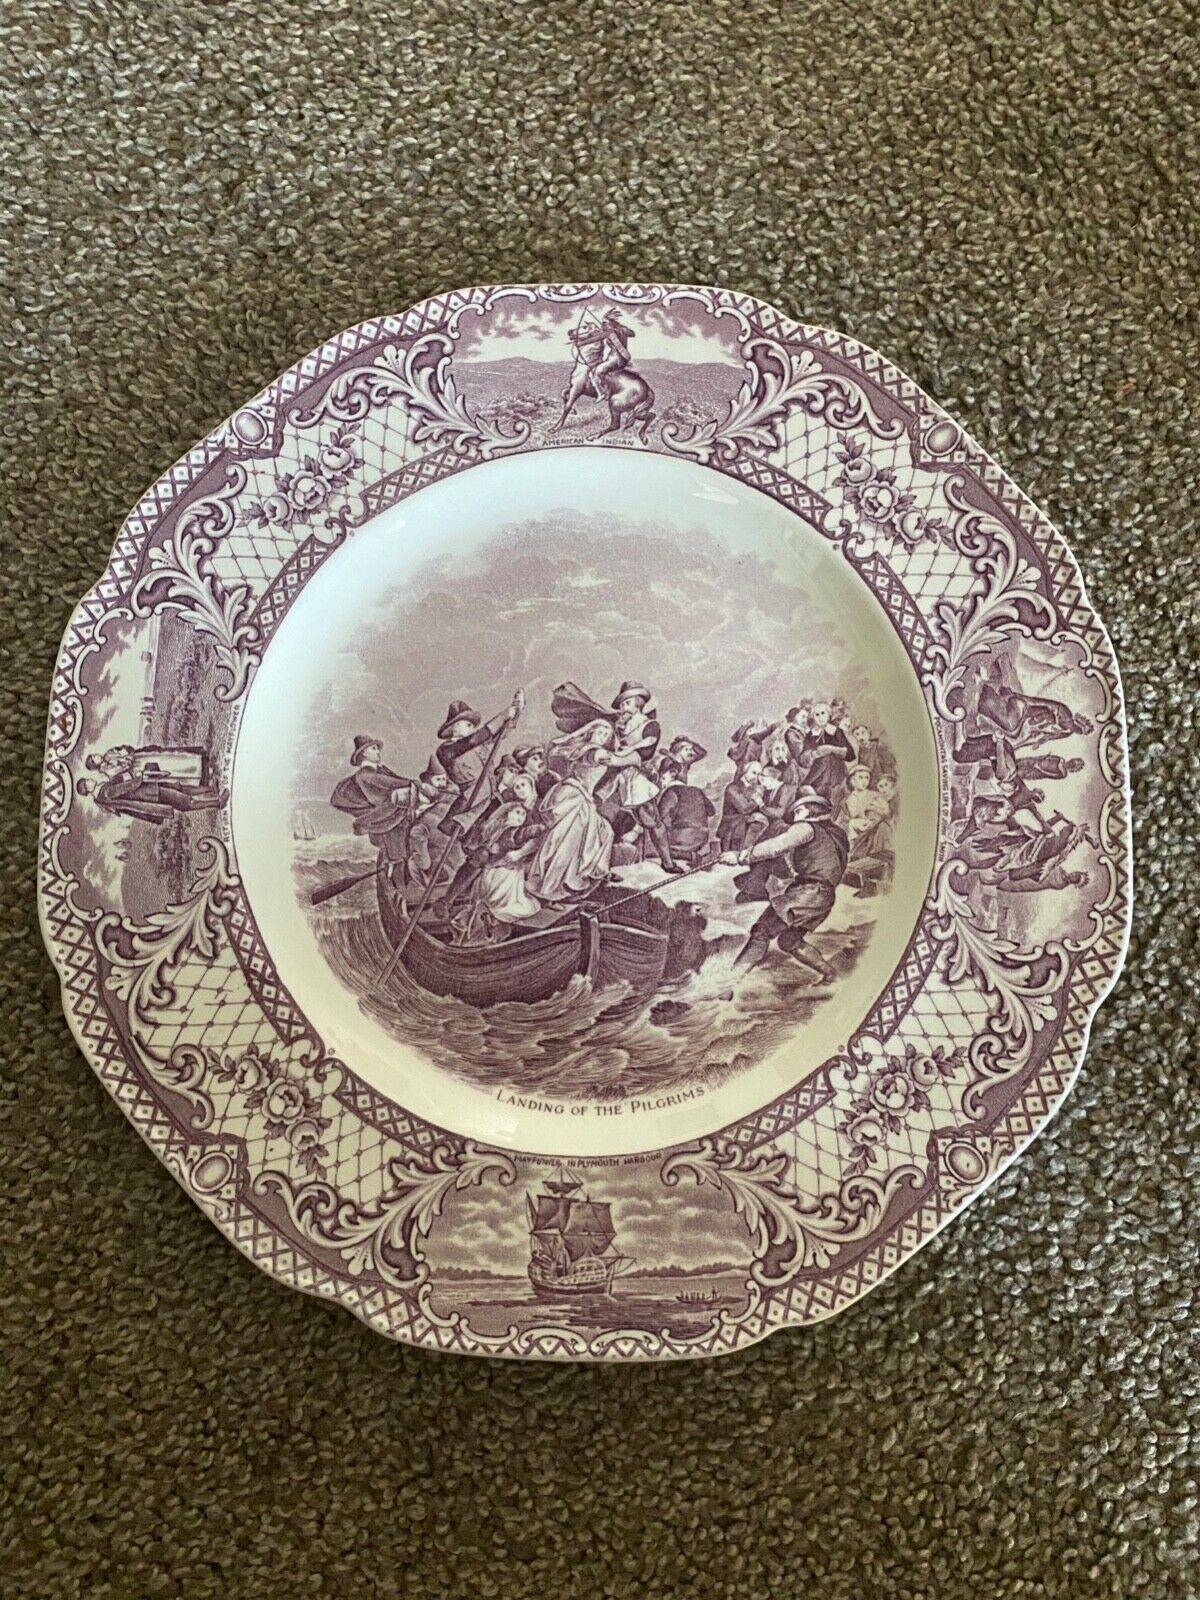 Colonial Times Crown Ducal Plate - Landing Of The Pilgrims